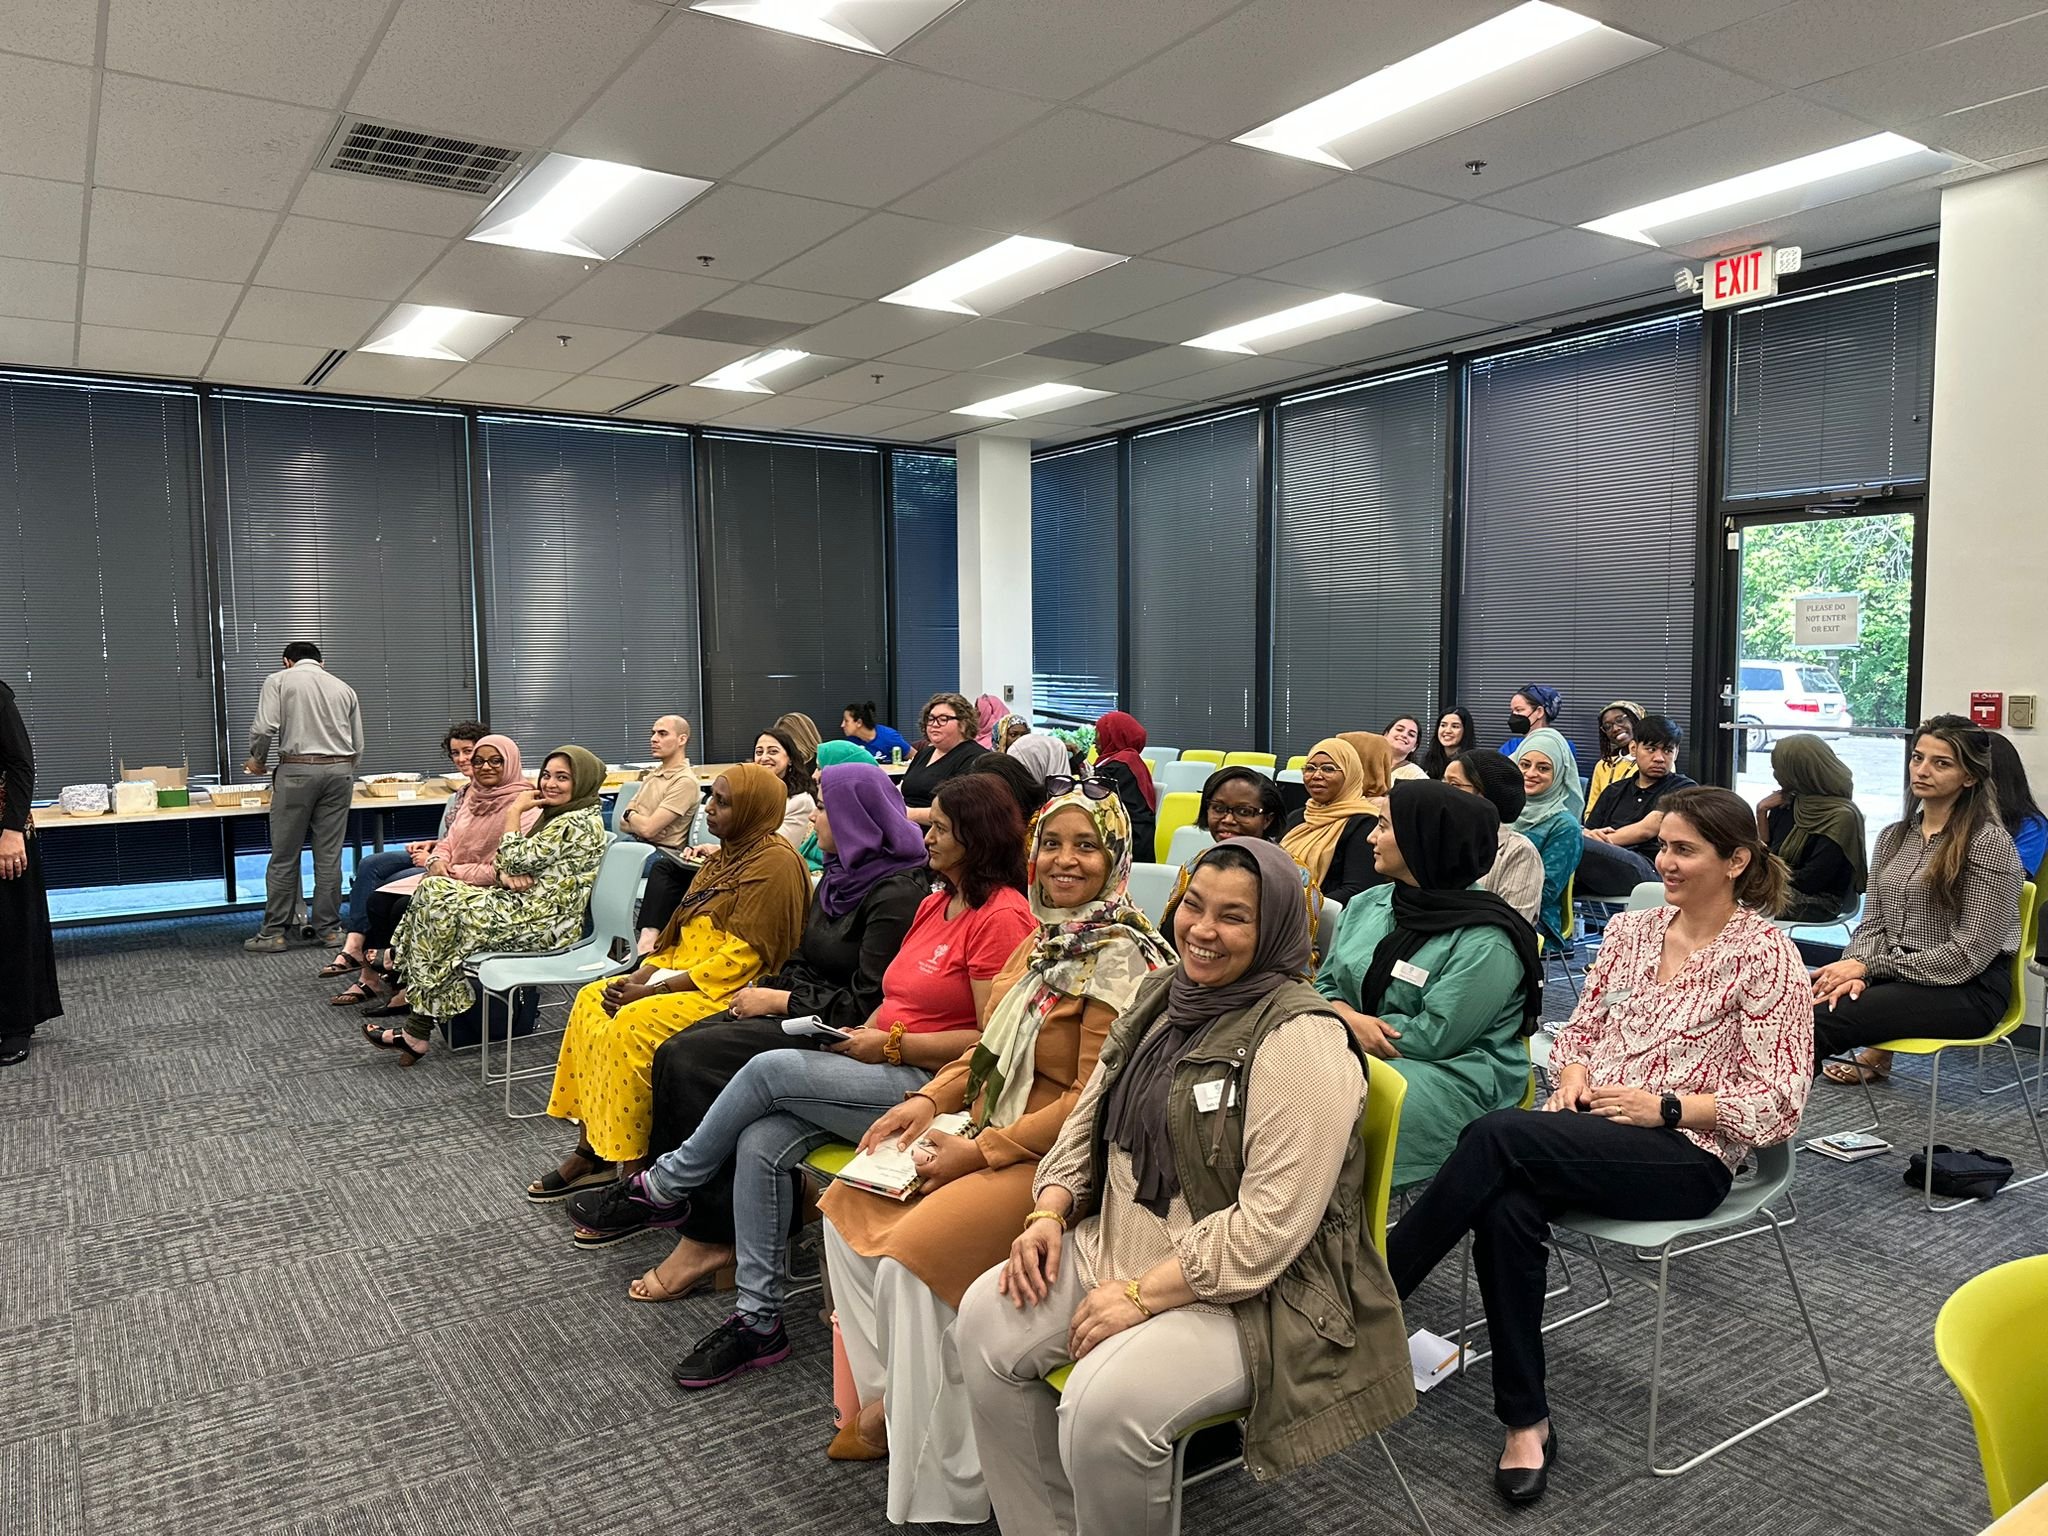 Last Friday, May 3rd, Ethaar hosted a Refugee Resilience training workshop with @cornerstonecounseling  Founding Director @suzy.ismail, who delivered an engaging and educational session to 45 service providers. Many of our refugee resettlement partne